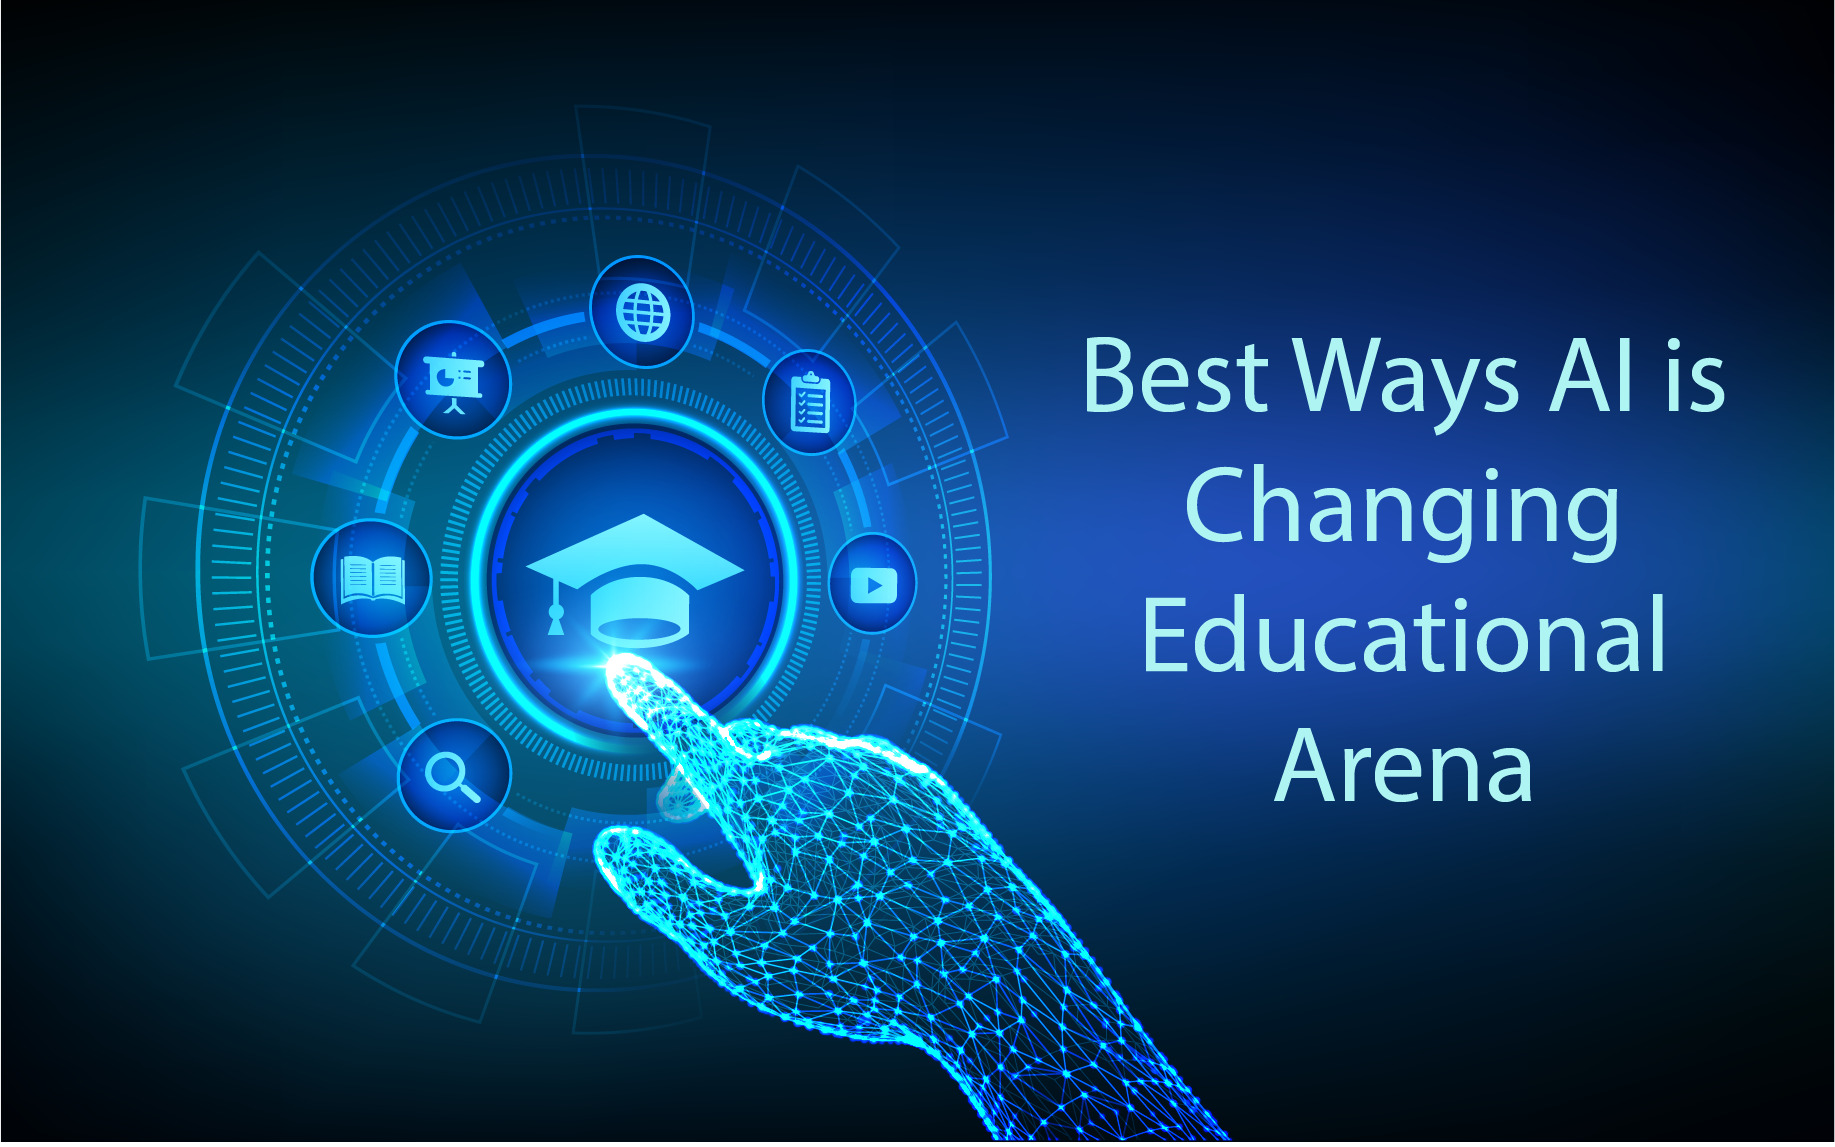 Best Ways AI is Changing the Educational Arena